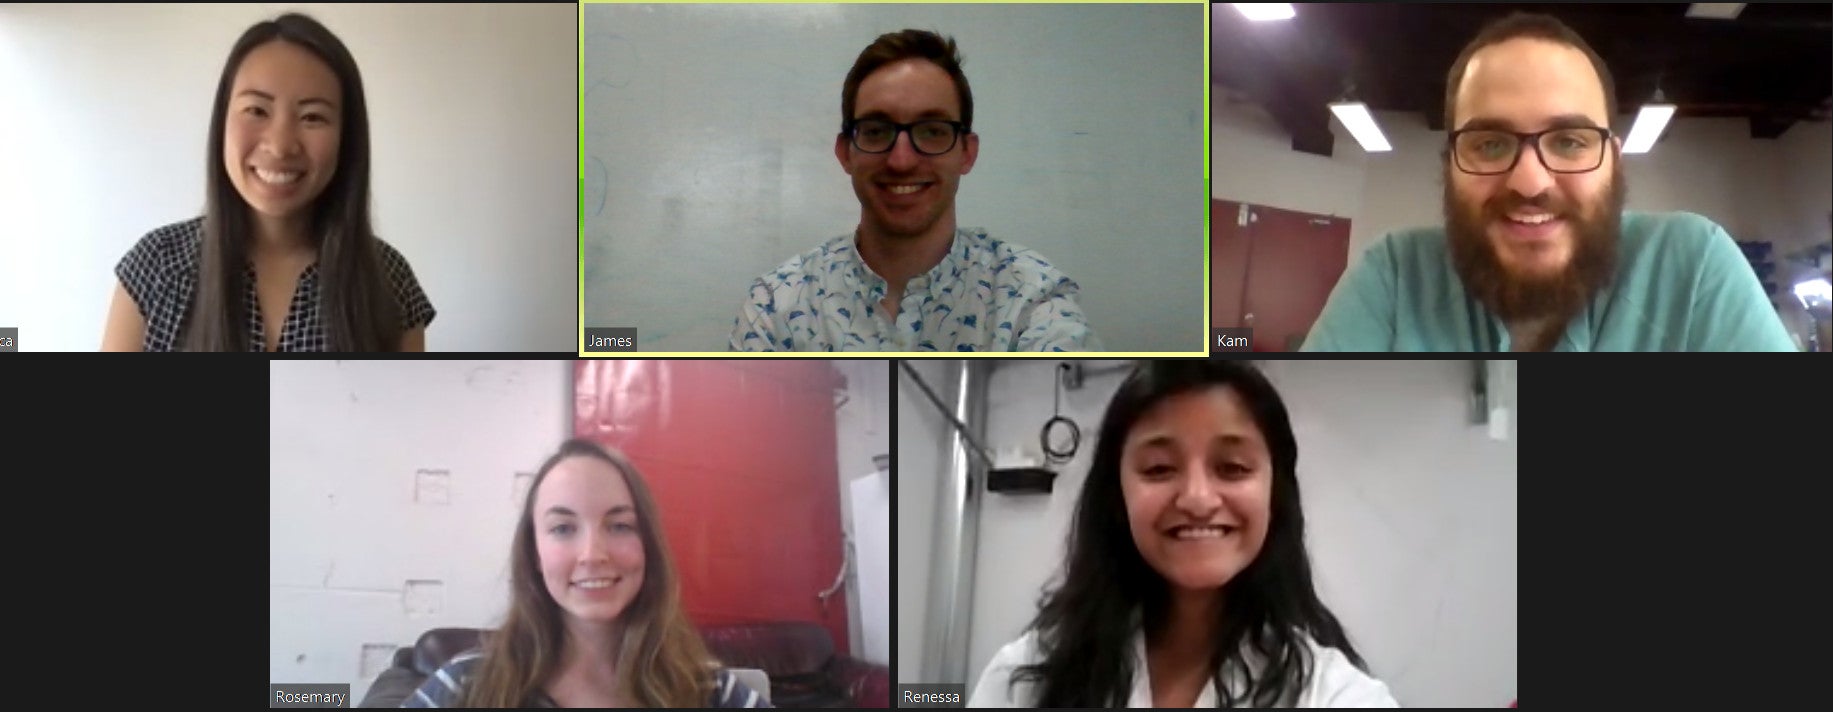 team of researchers on a video call